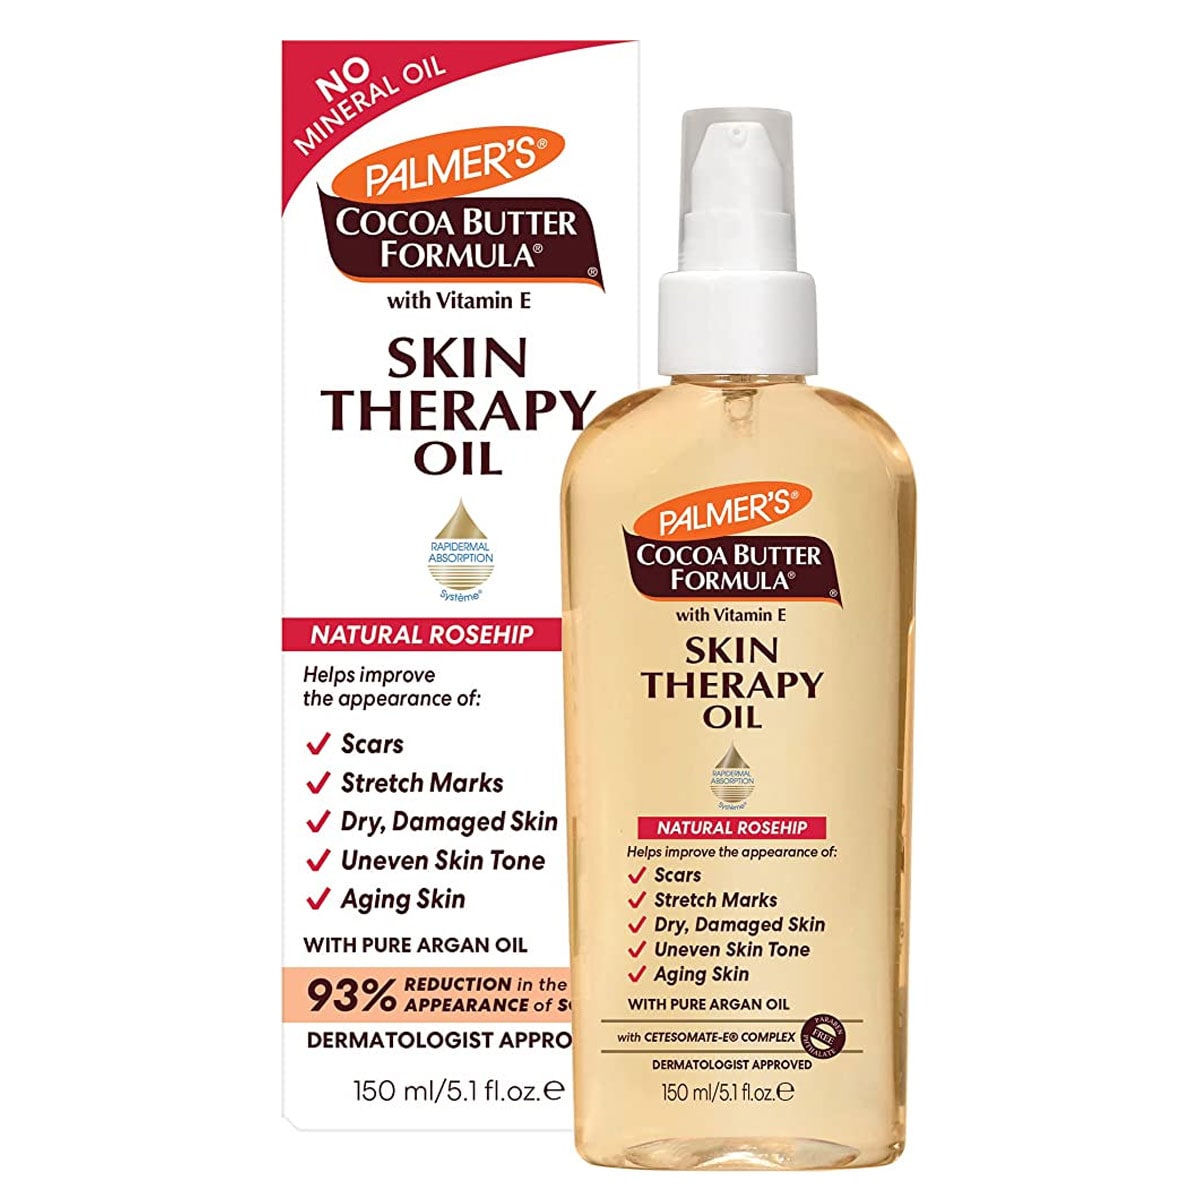 Palmers Cocoa Butter Skin Therapy Oil Rosehip Fragrance 150ml